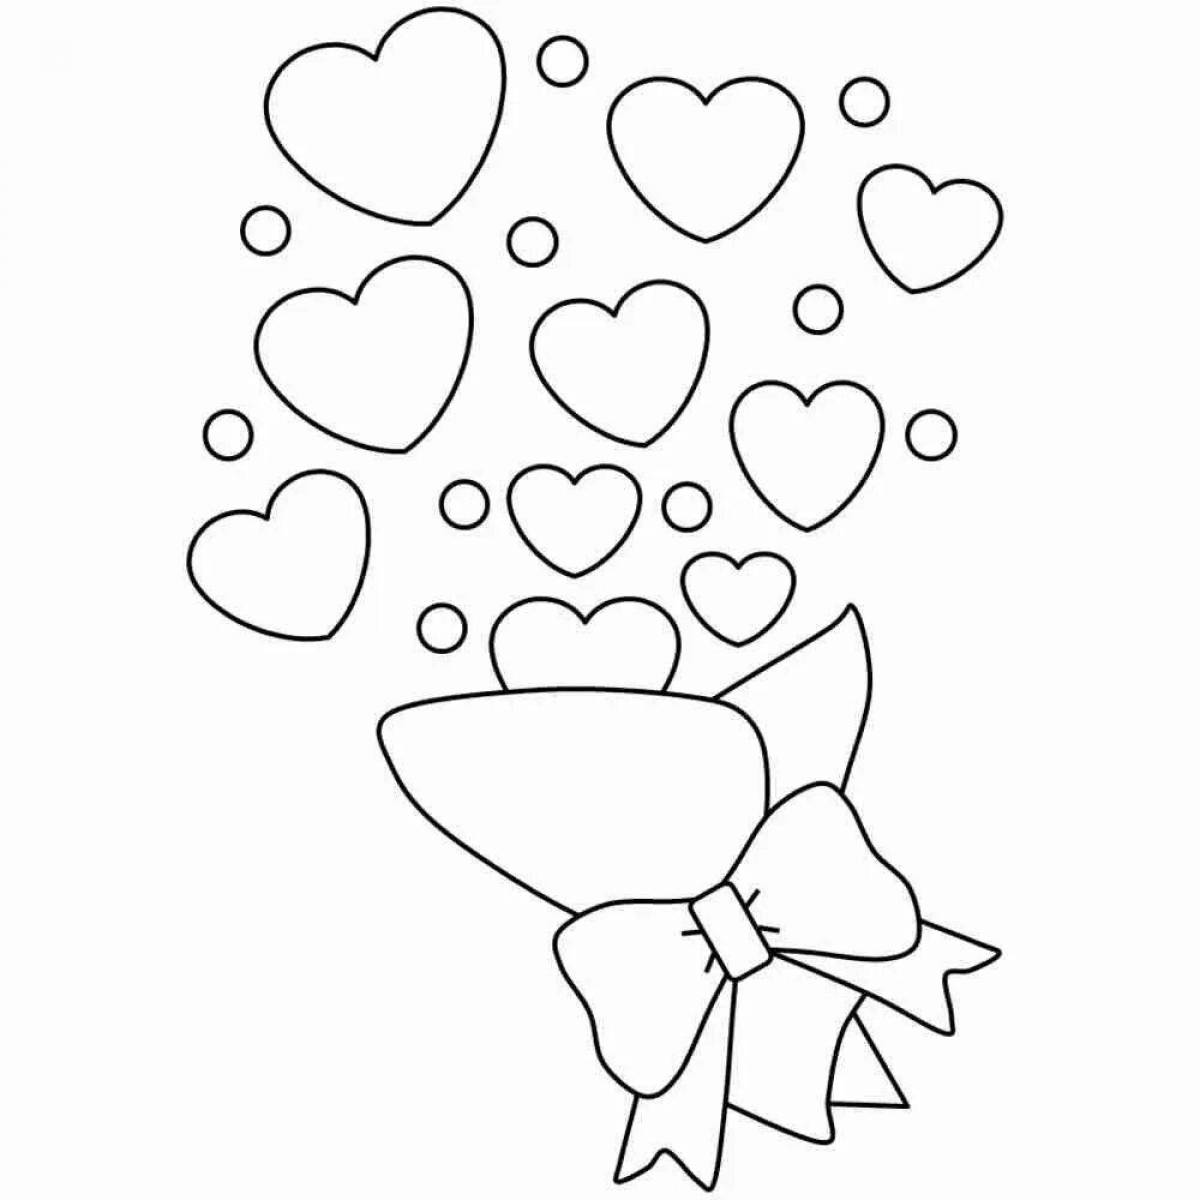 Charming card heart coloring